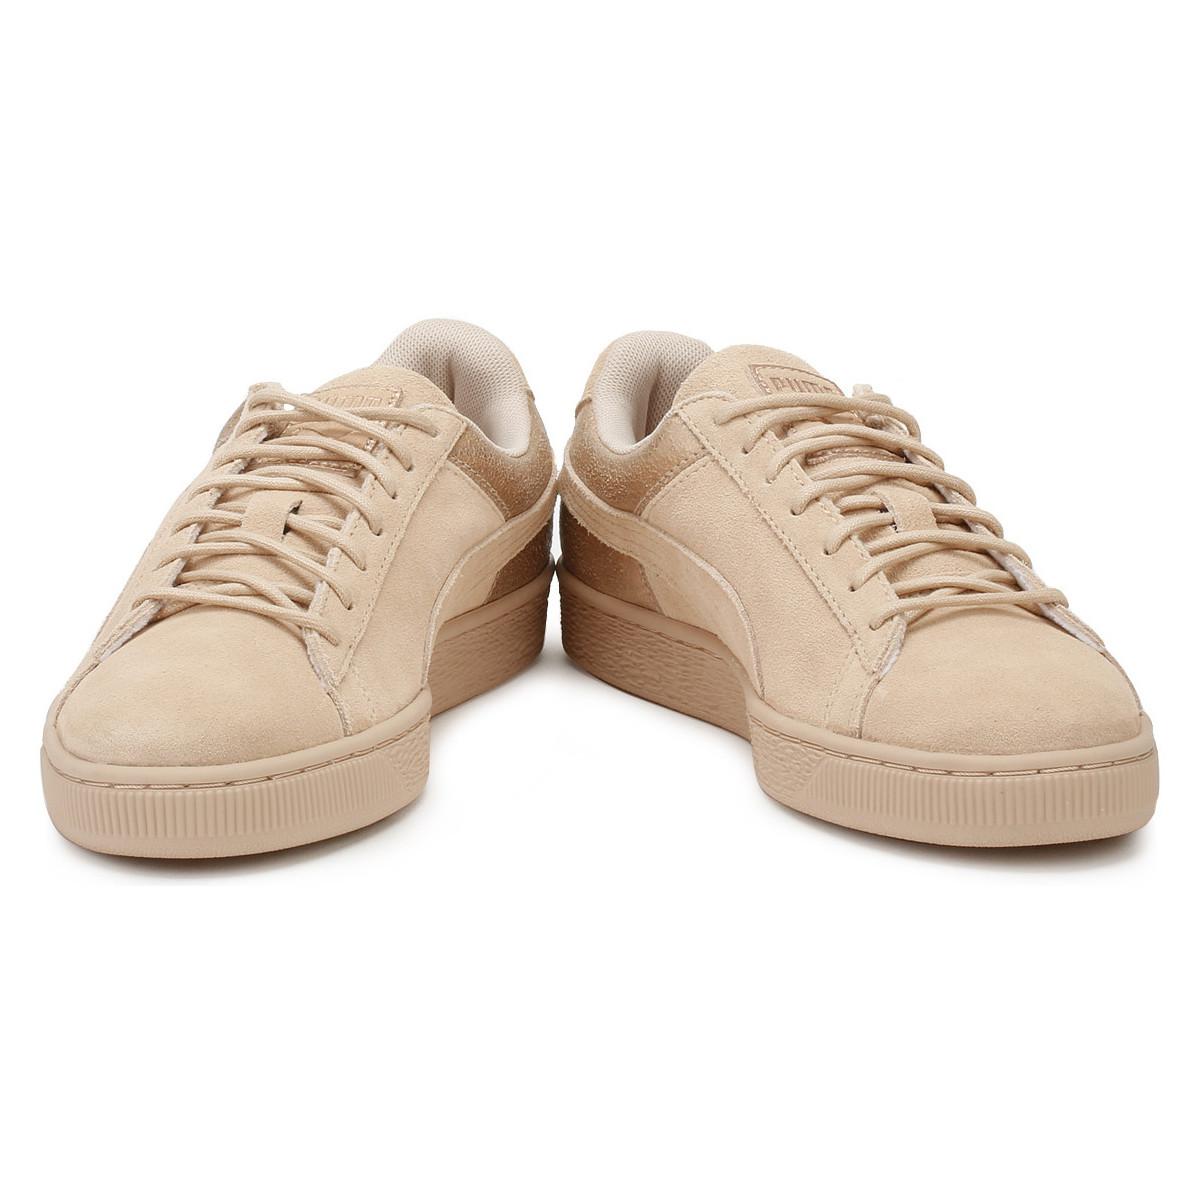 brown suede trainers womens good 0366f 